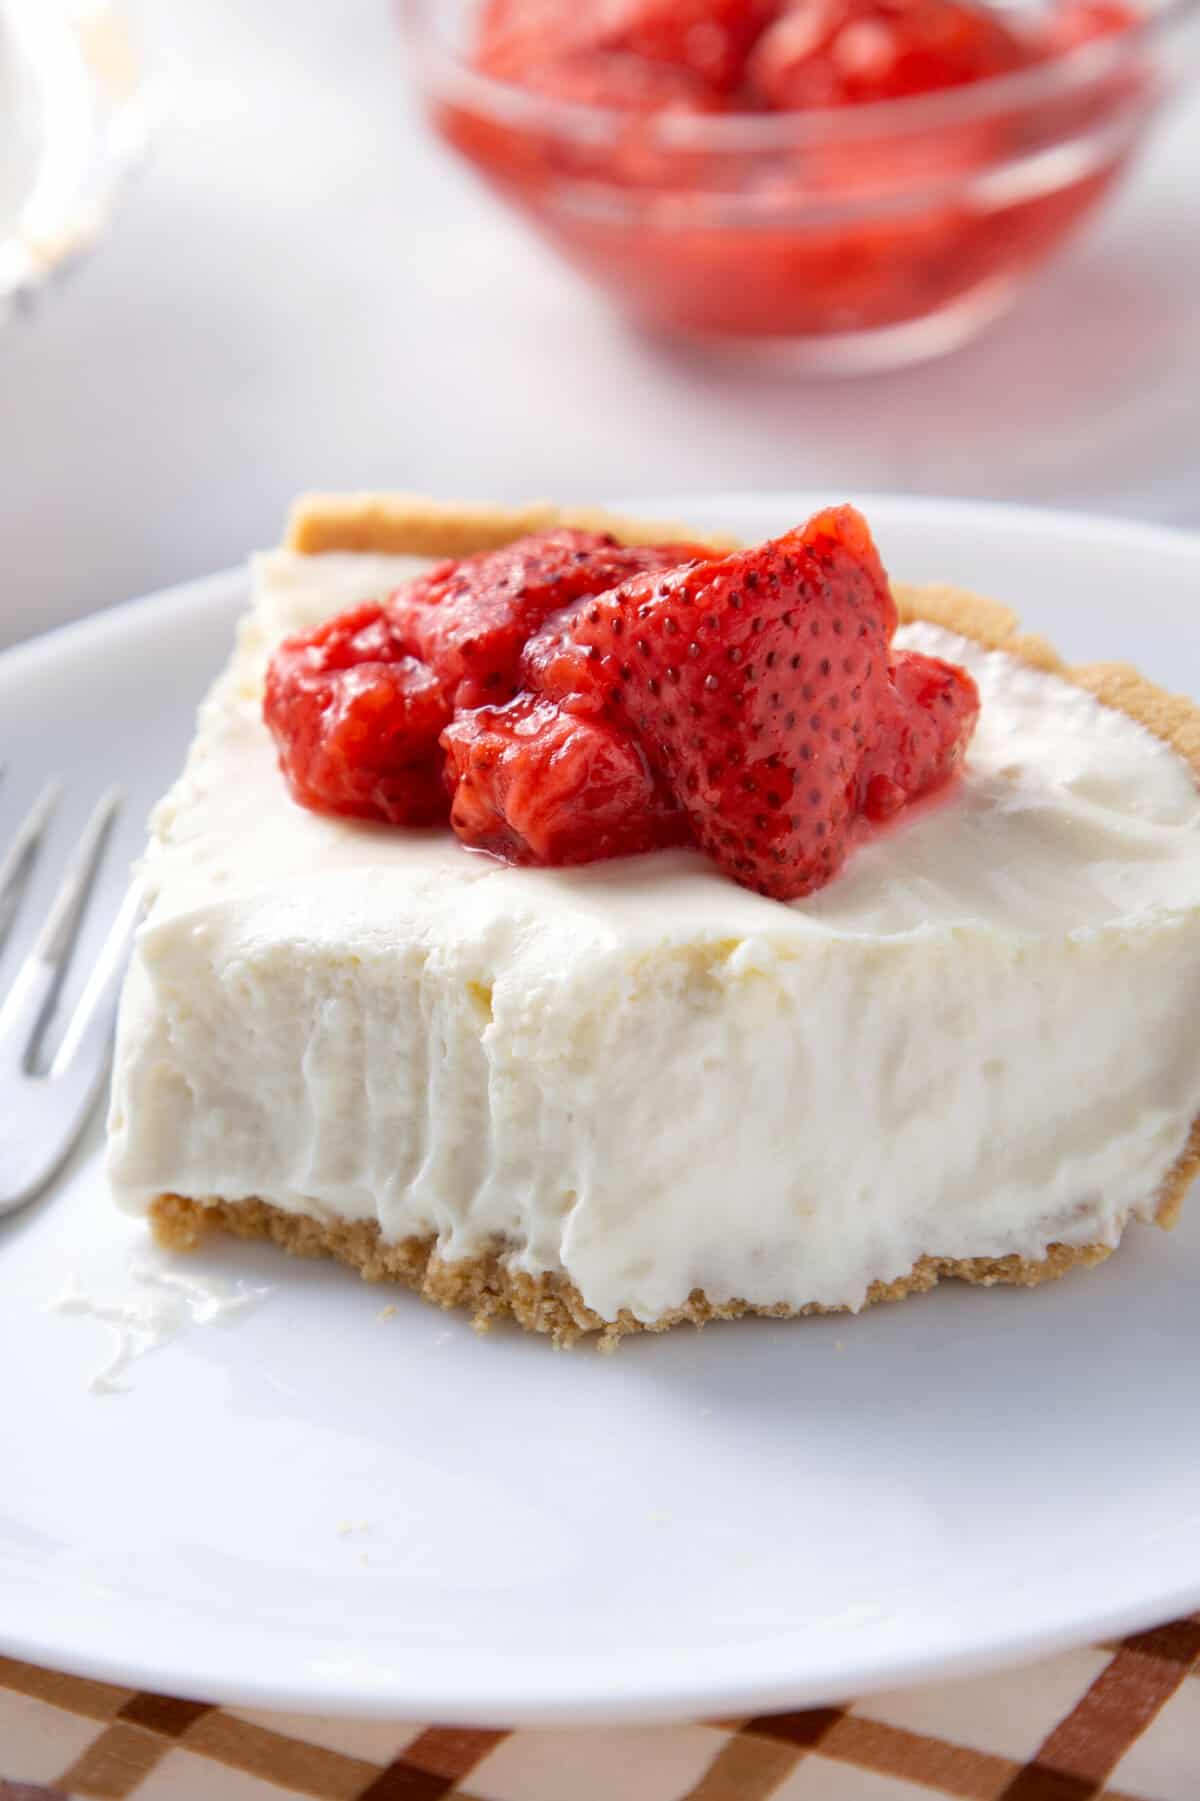 slice of 3-ingredients no-bake cheesecake topped with macerated strawberries served on a white round plate